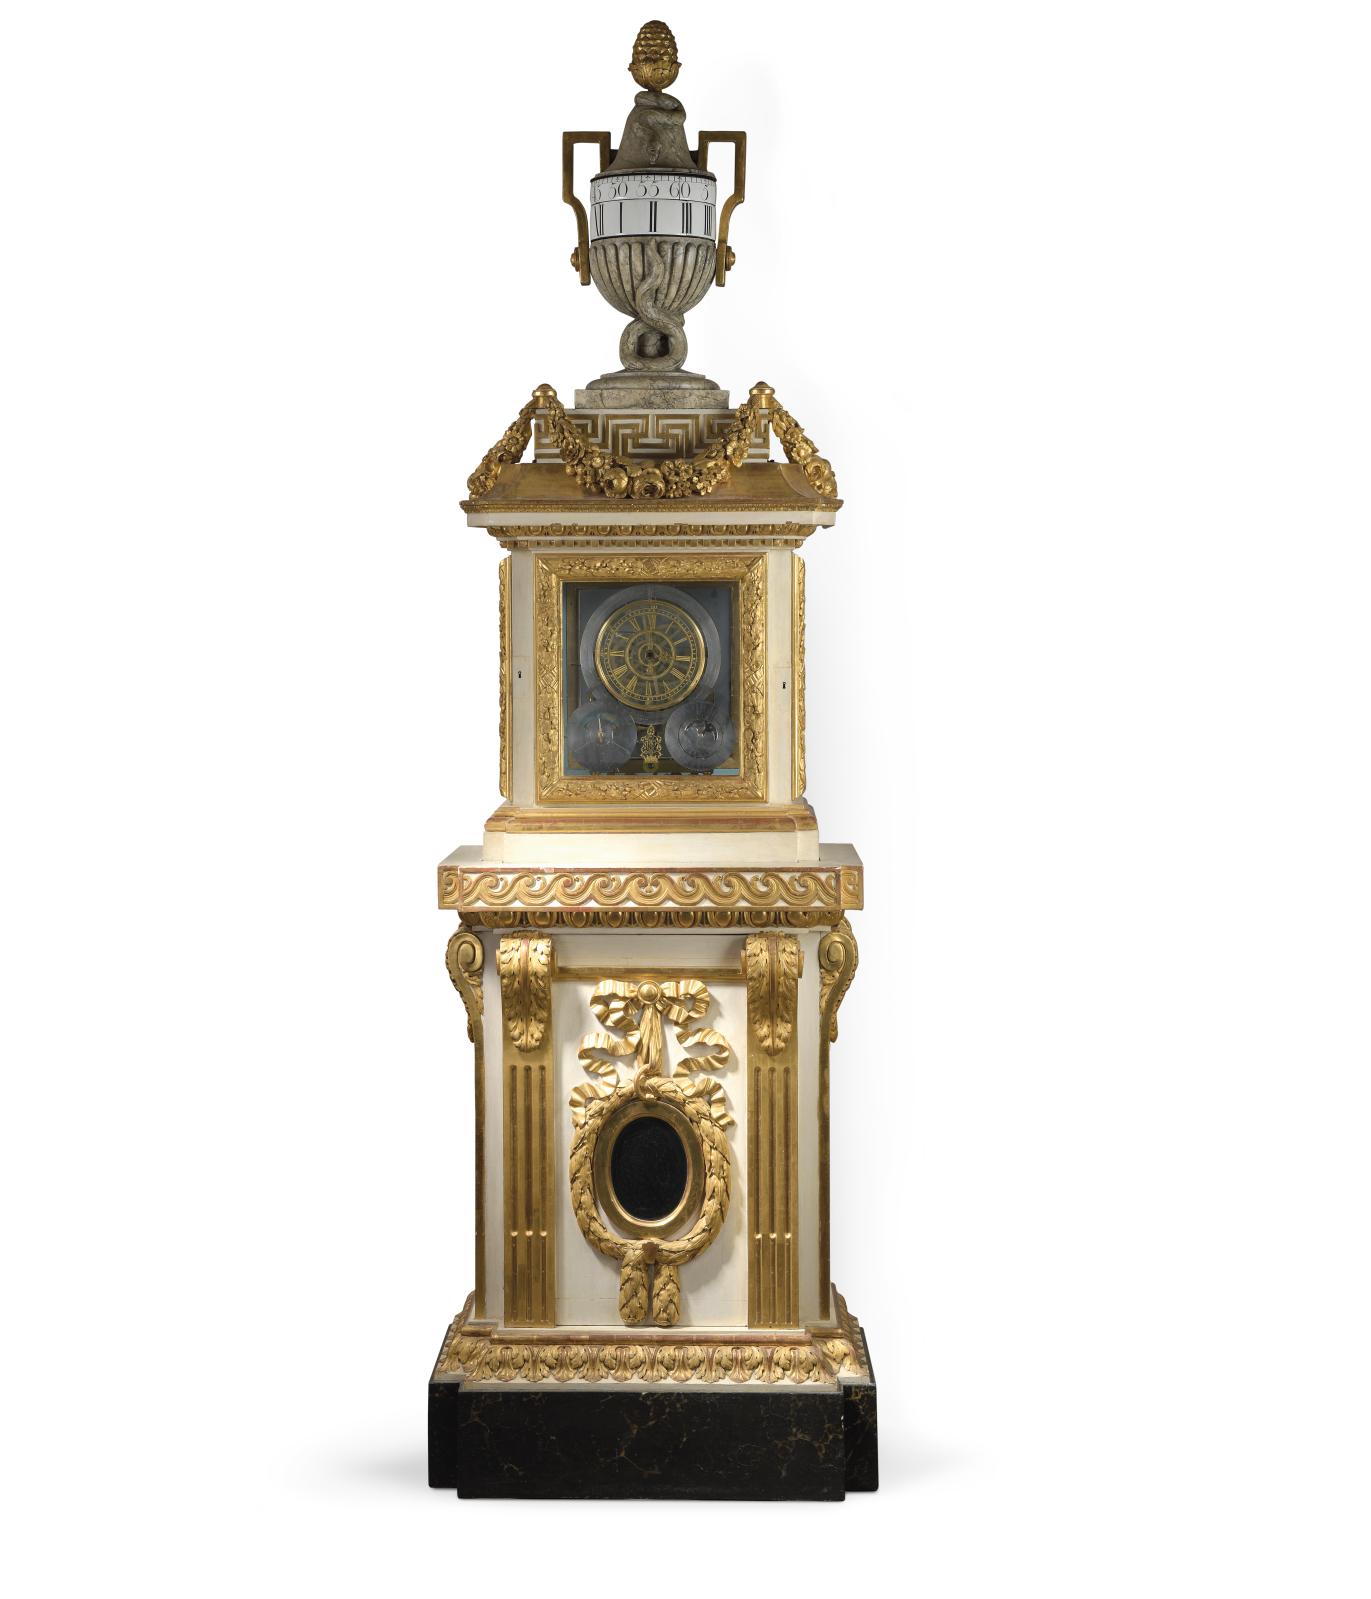 A Monumental Astronomical Pendulum Clock Attributed to Jean-Louis Bouchet